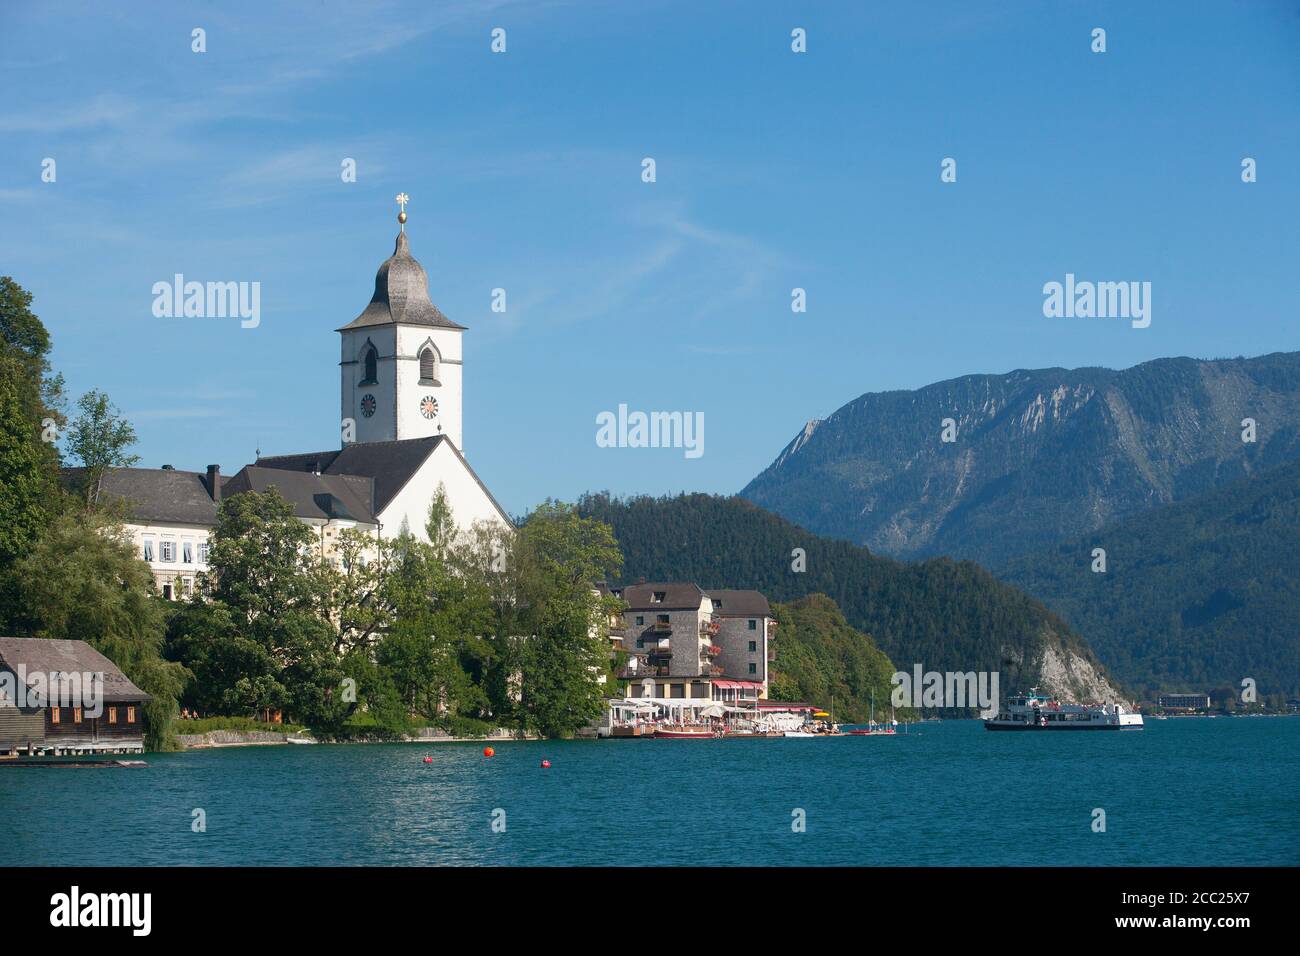 Austria, View of Pilgrimage church at St. Wolfgang, Wolfgangsee lake in foreground Stock Photo